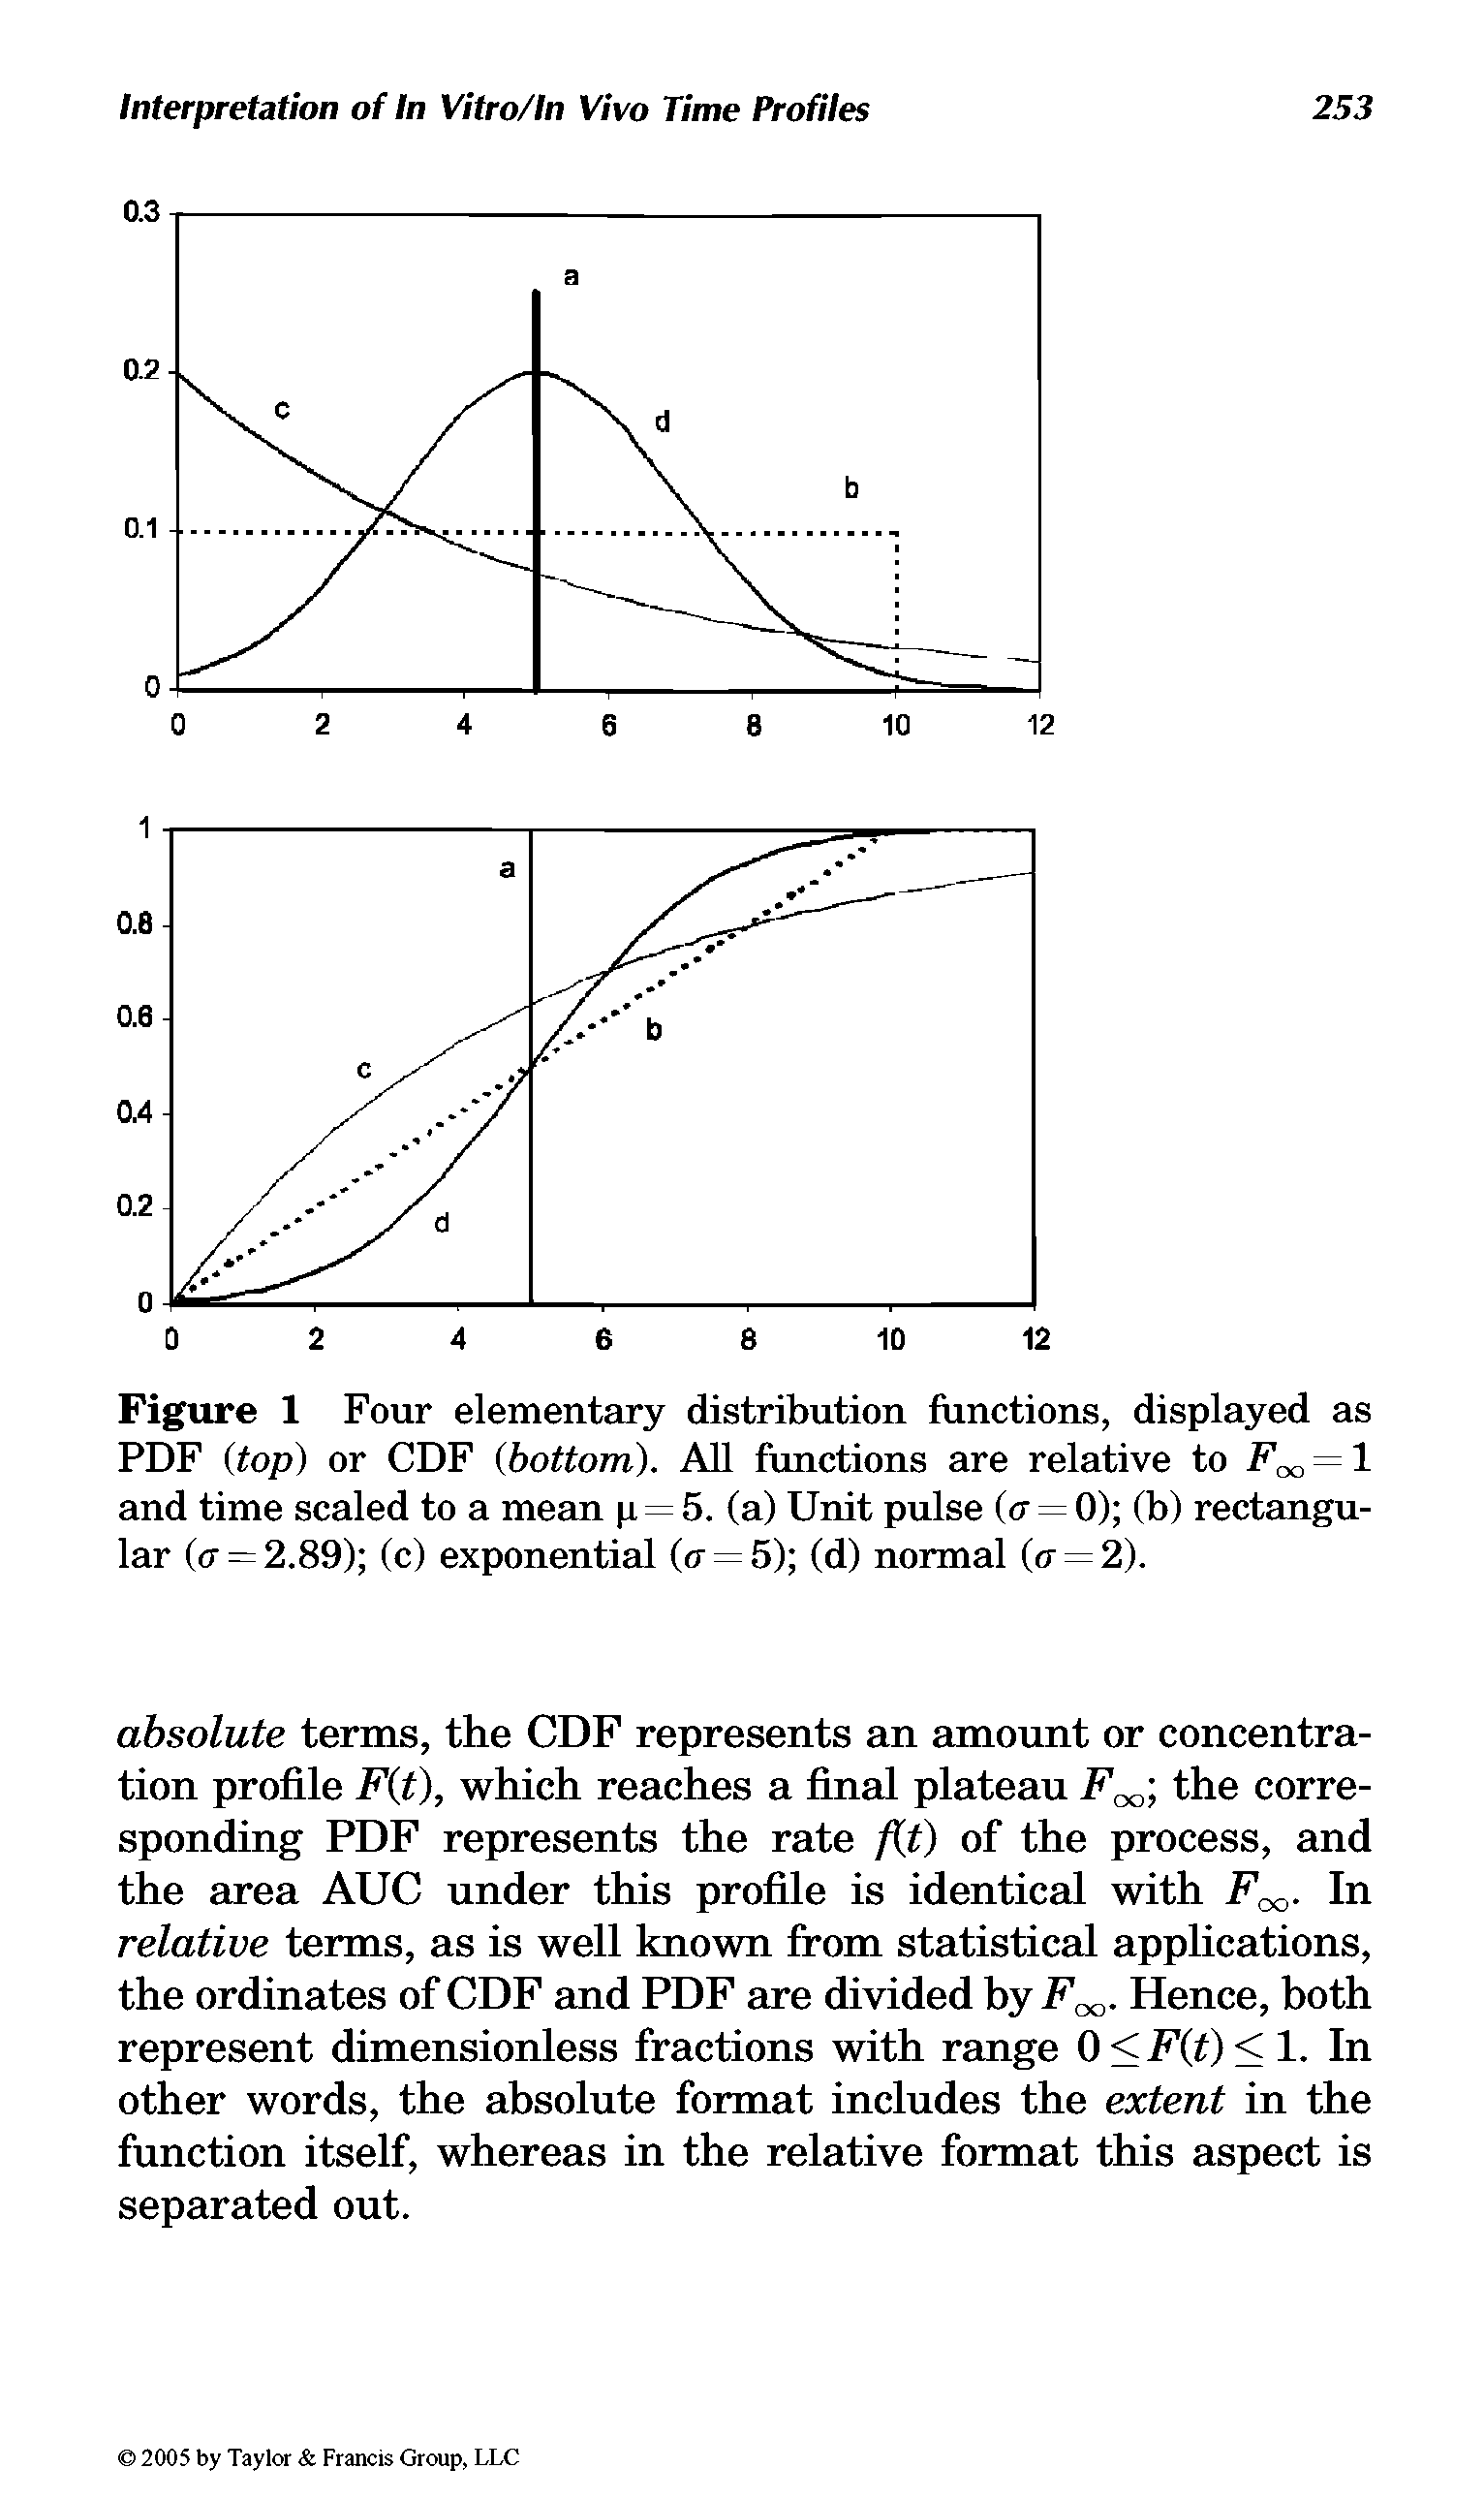 Figure 1 Four elementary distribution functions, displayed as PDF (top) or CDF (bottom). All functions are relative to Frx, = 1 and time scaled to a mean p = 5. (a) Unit pulse (<x = 0) (b) rectangular (<x = 2.89) (c) exponential (cr = 5) (d) normal (cr = 2).